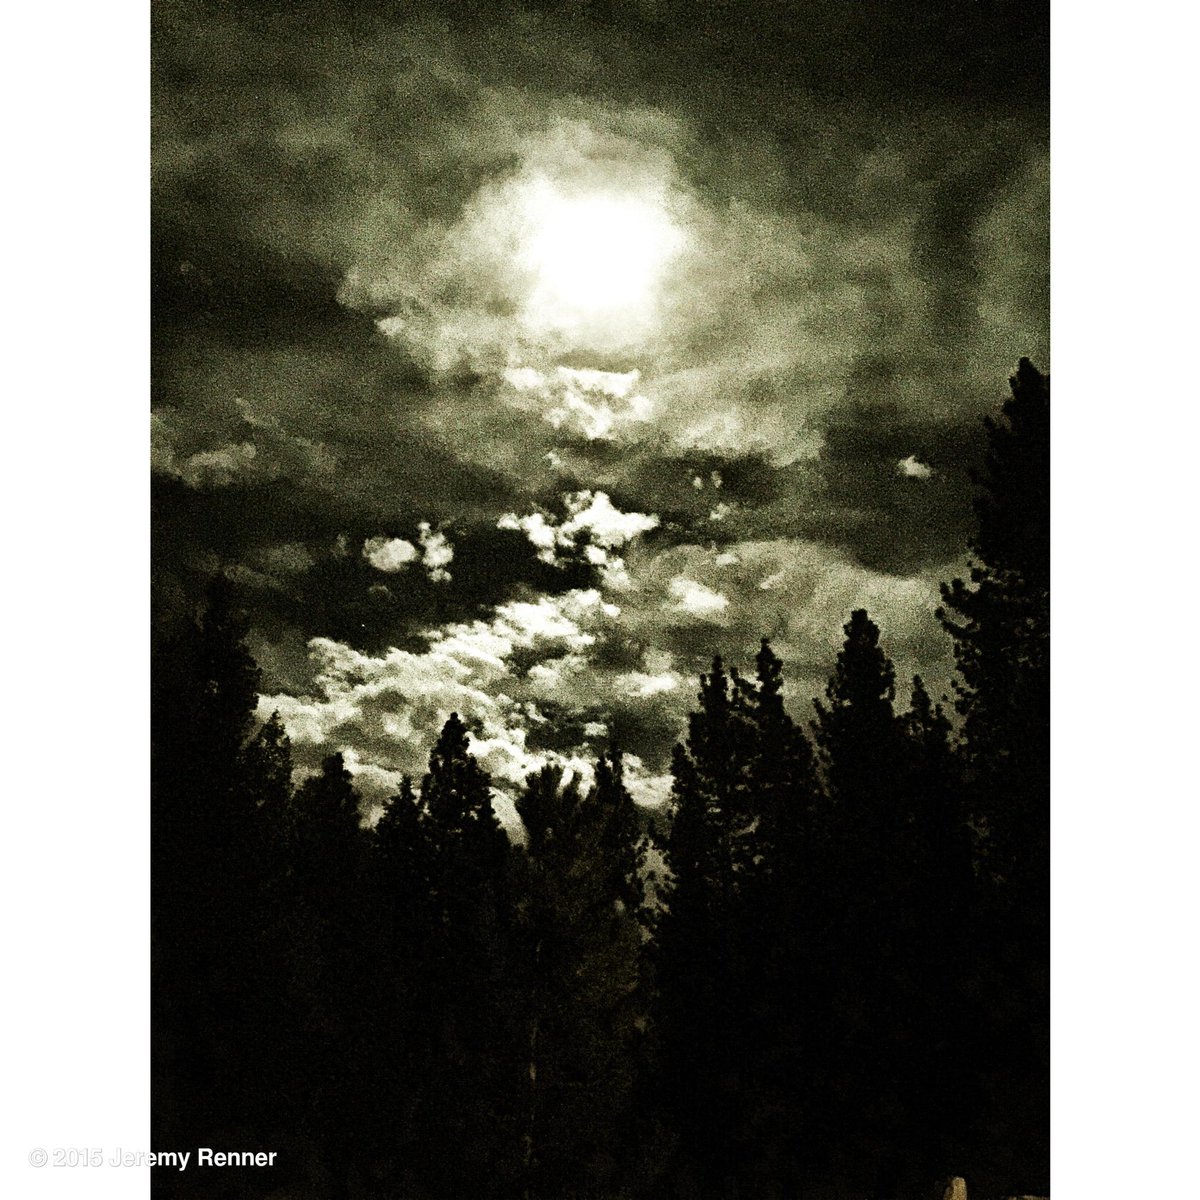 Goodnight moon was the book to read tonight #thankyou #sleeptight #nobedbugshere #tahoe http://t.co/a6KIBhYLSJ